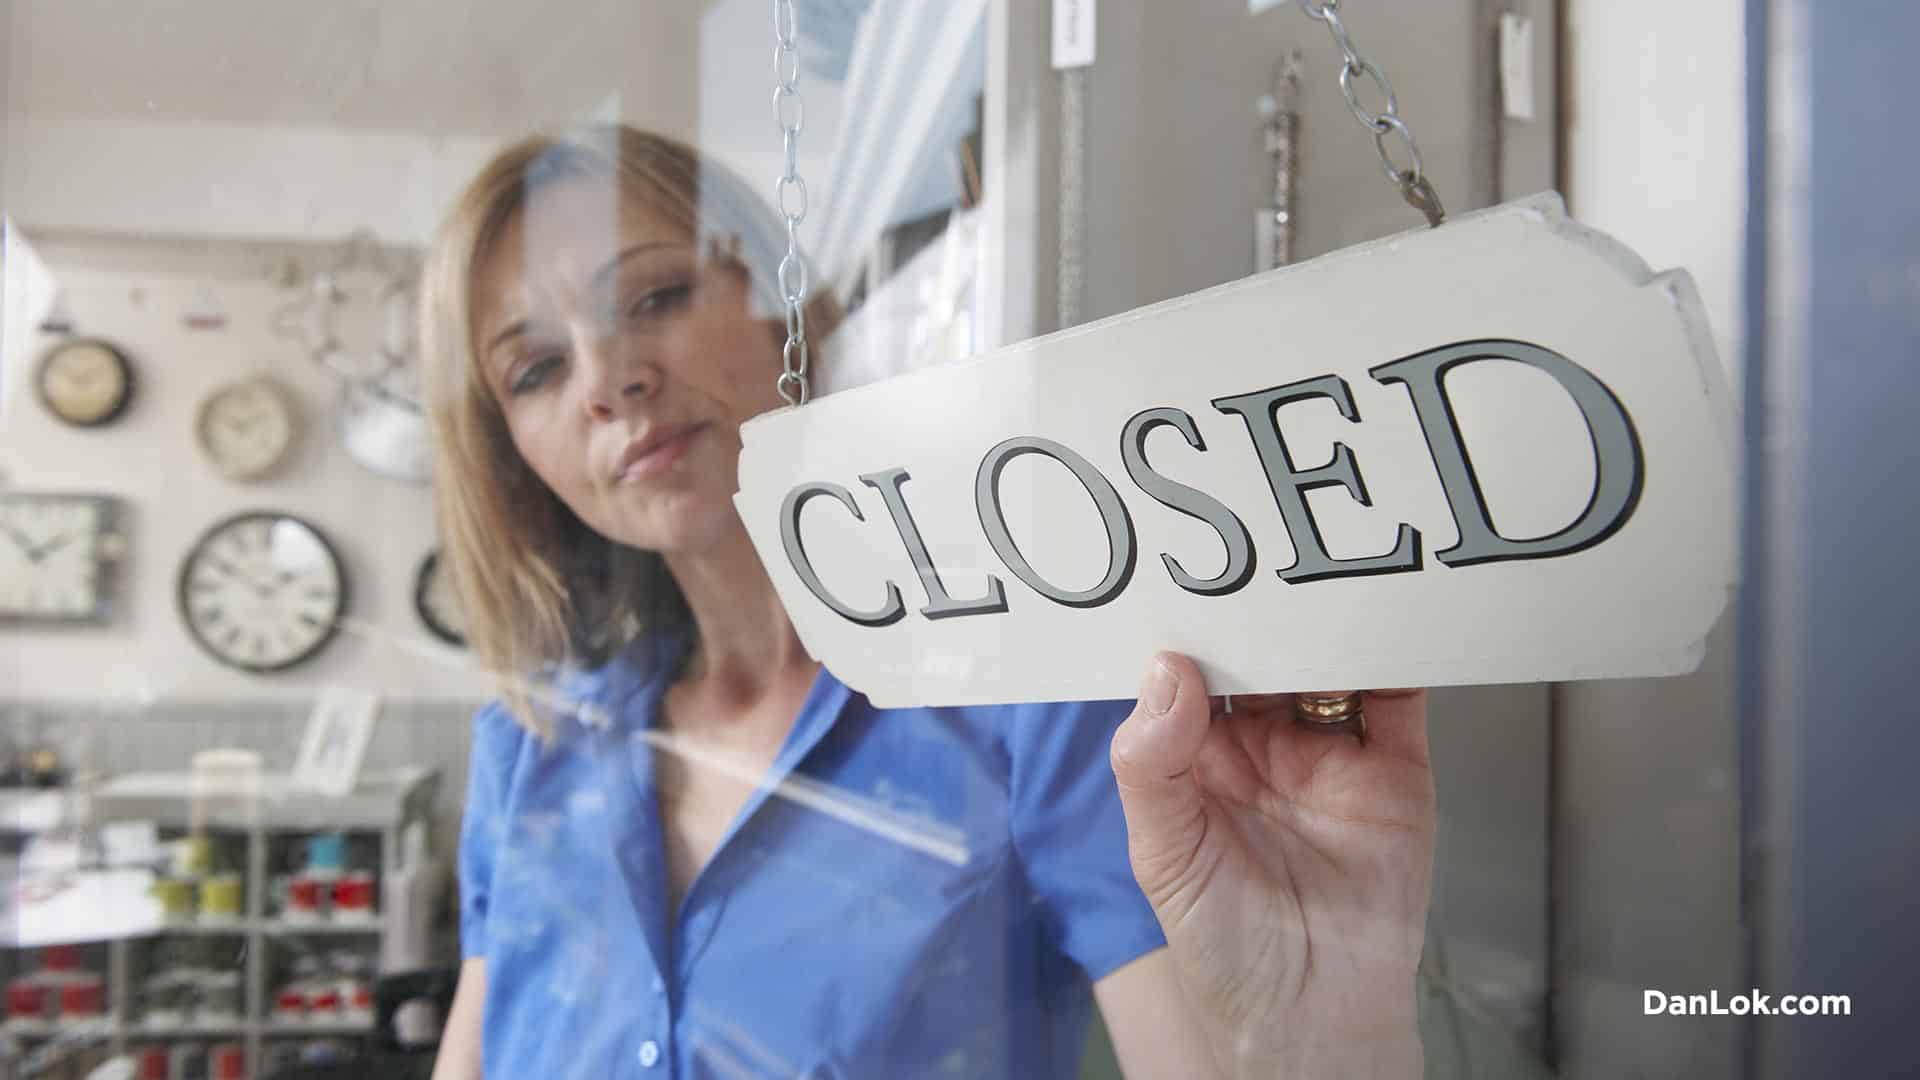 Image of a store's closed sign